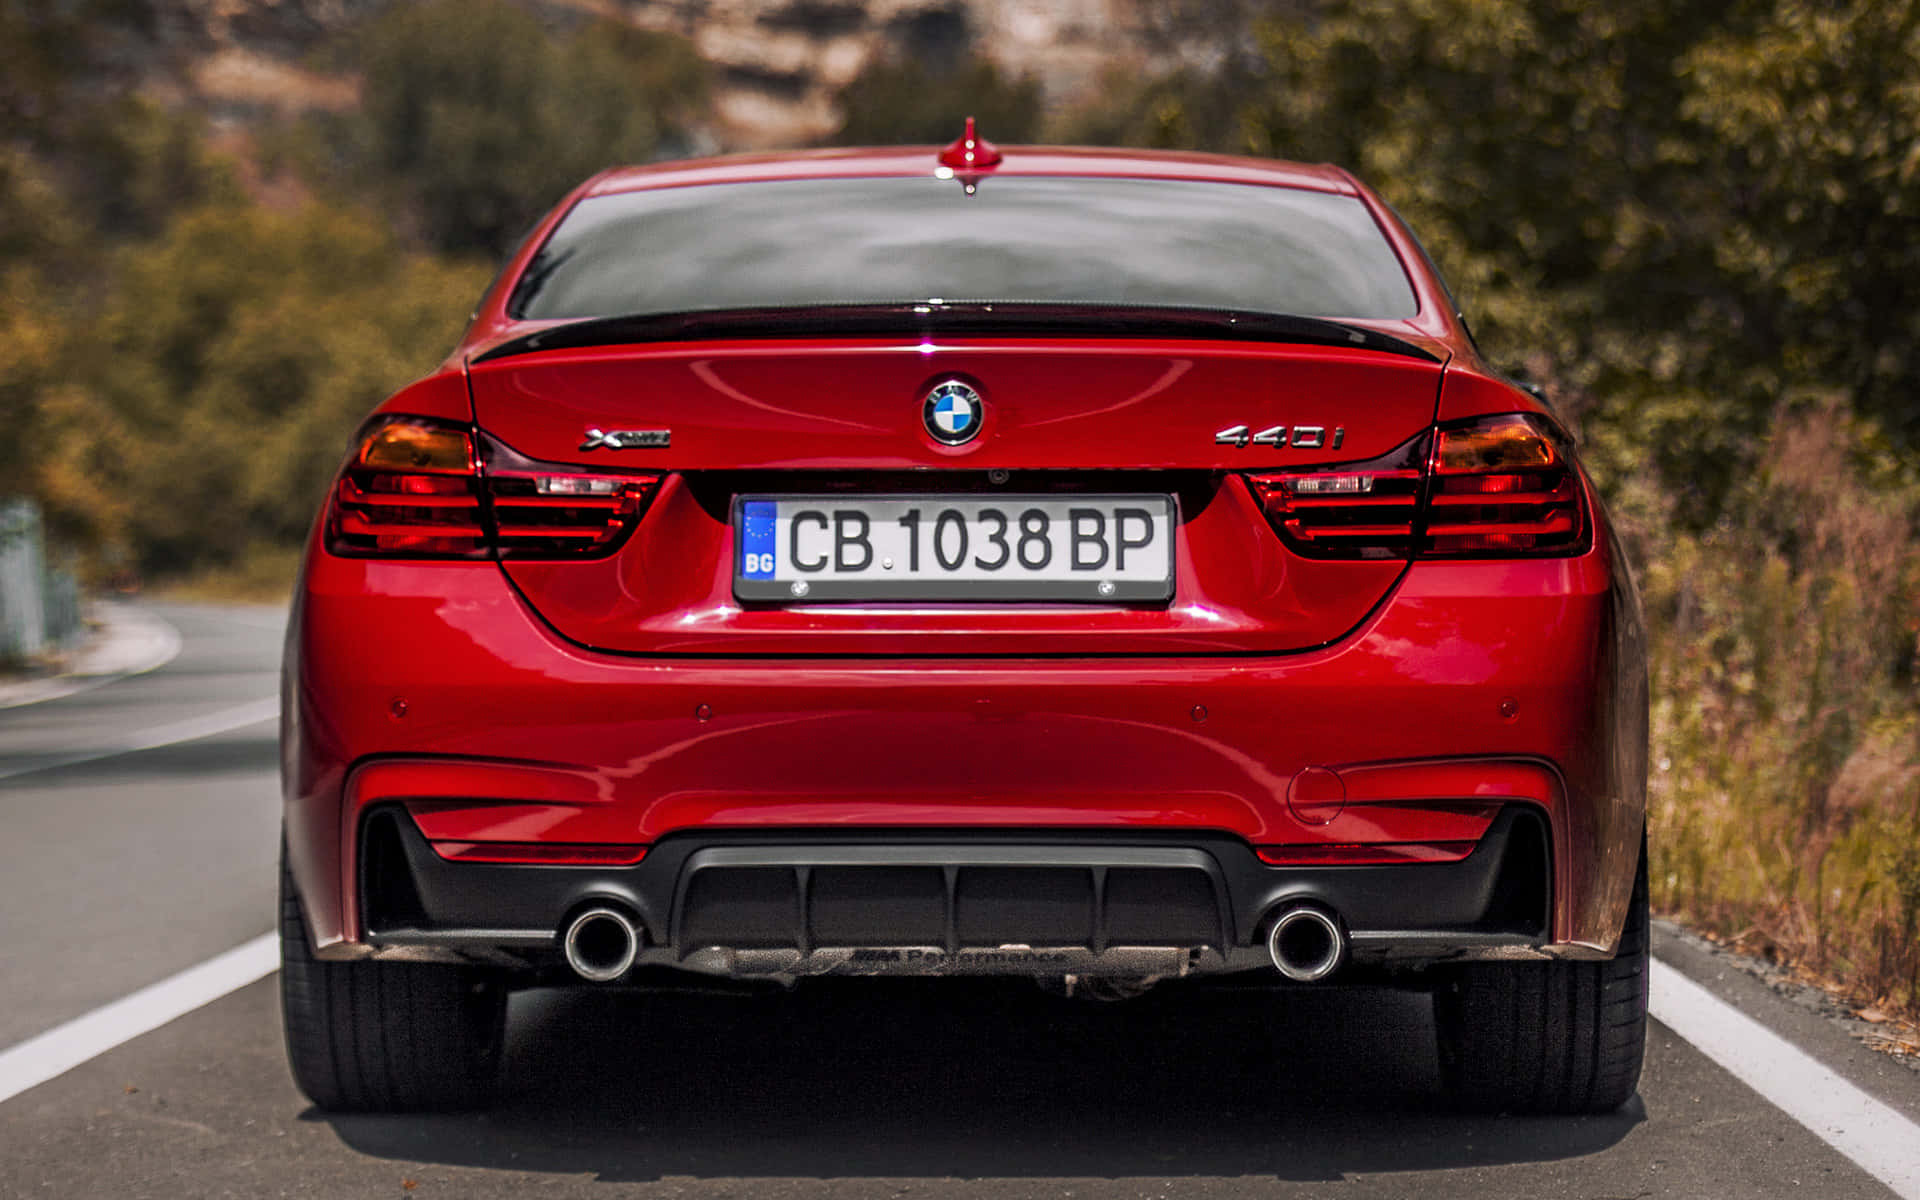 Feel the power of the BMW 440i Wallpaper